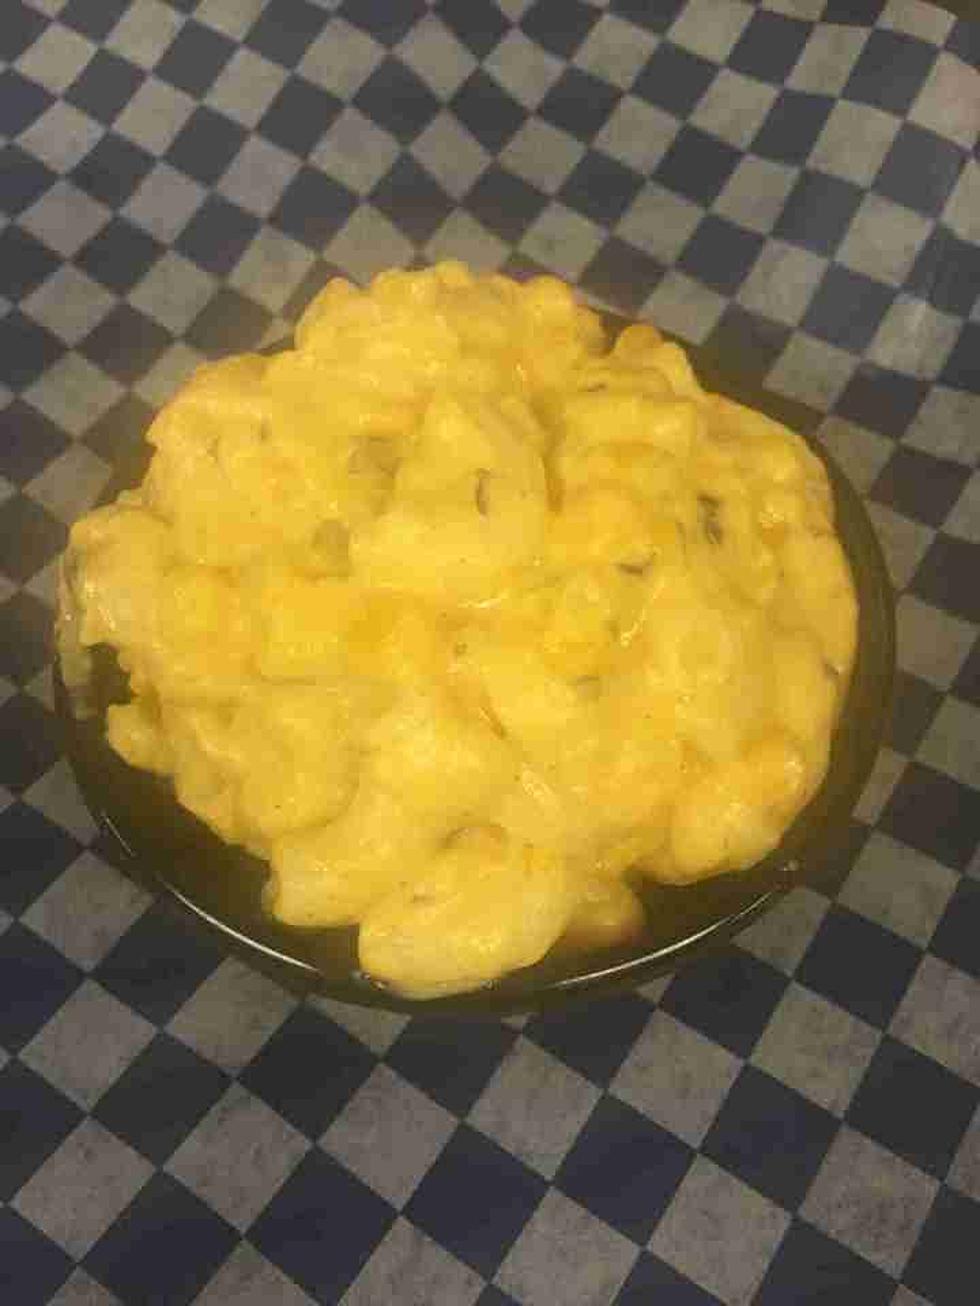 5 Places Around Town To Get Awesome Mac N’ Cheese